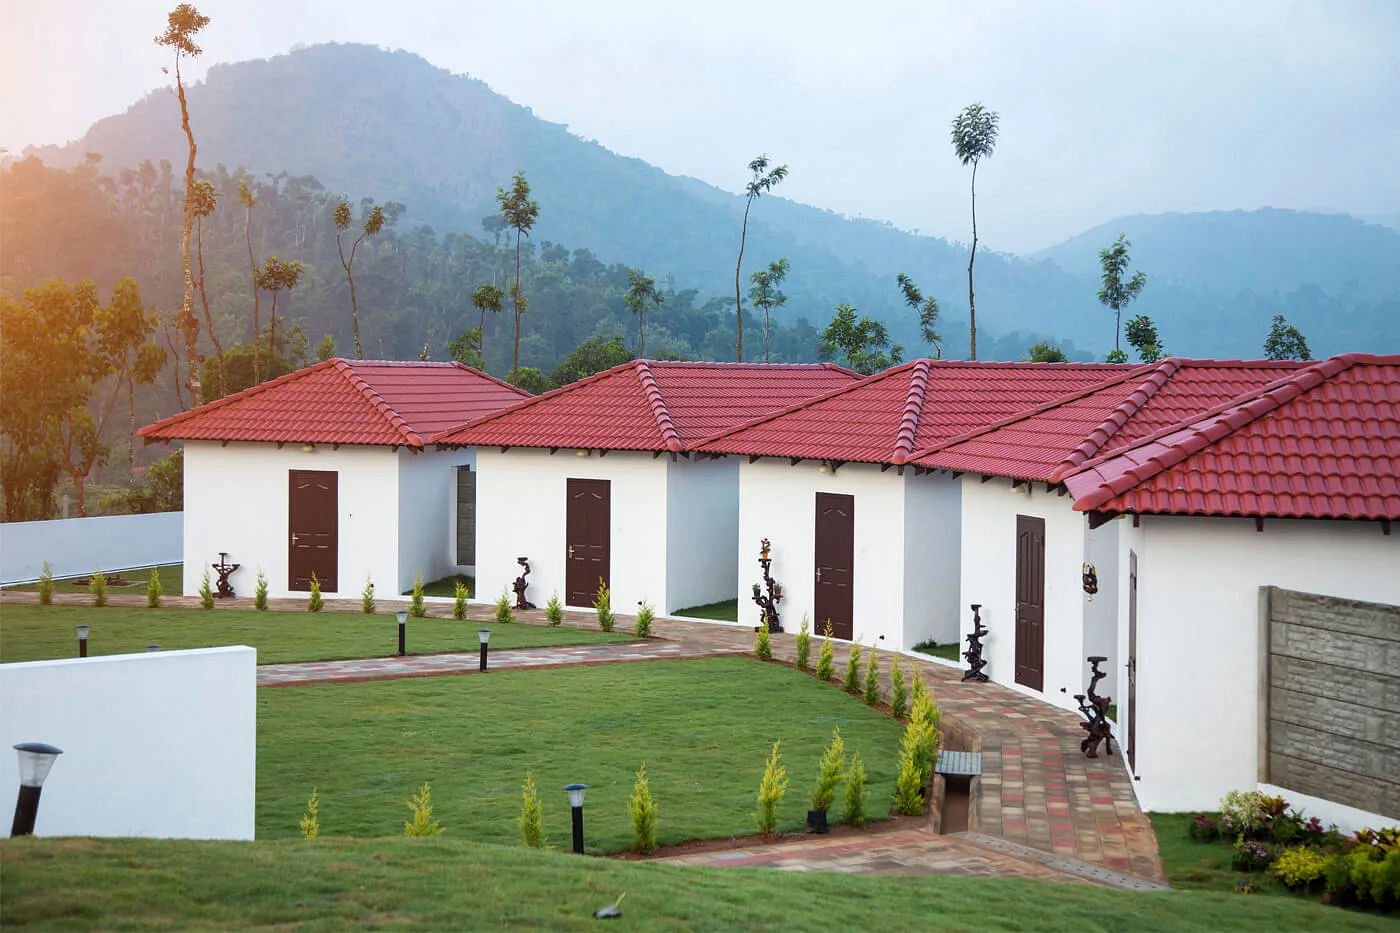 1N/2D at an Enchanting Homestay in Chikmagalur